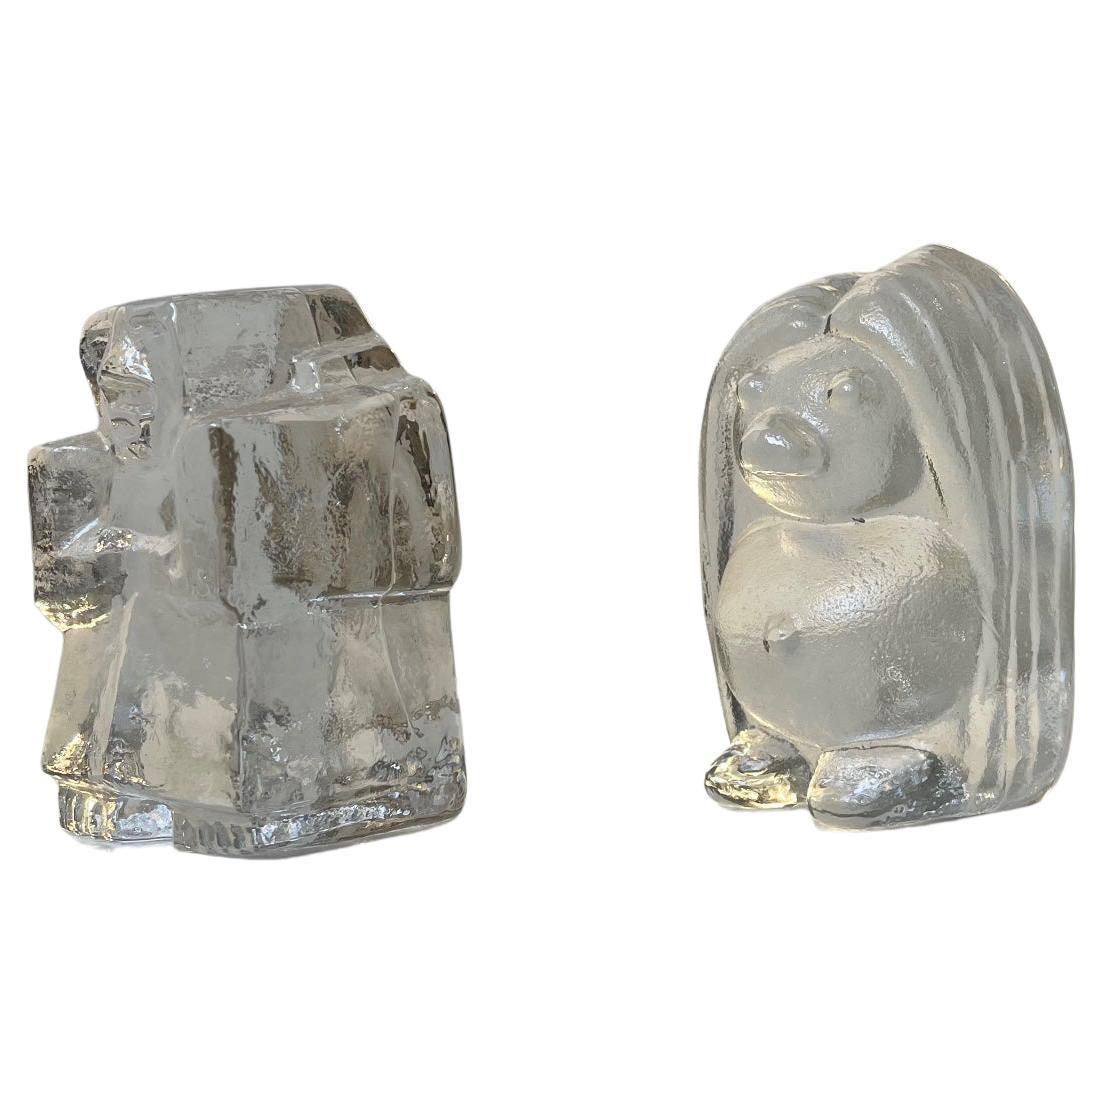 Vintage Scandinavian Troll Figurines Bookends in Ice Glass by Höglund & Bergdala For Sale